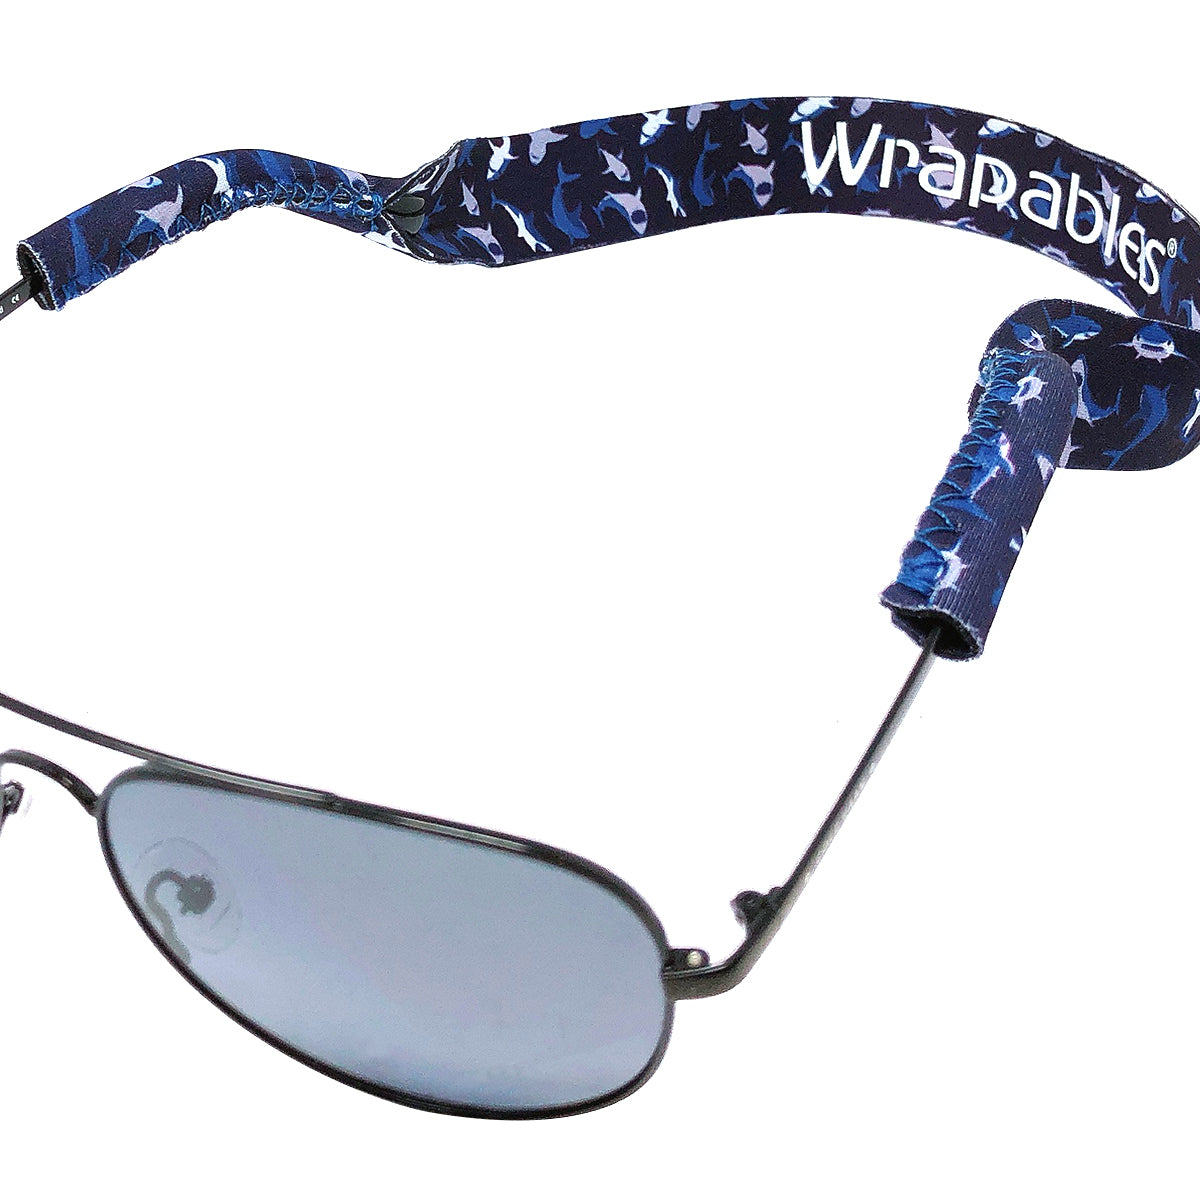 Wrapables Adjustable Eyewear Retainer, Sunglass Strap with Neoprene Floating Material for Sports and Outdoors